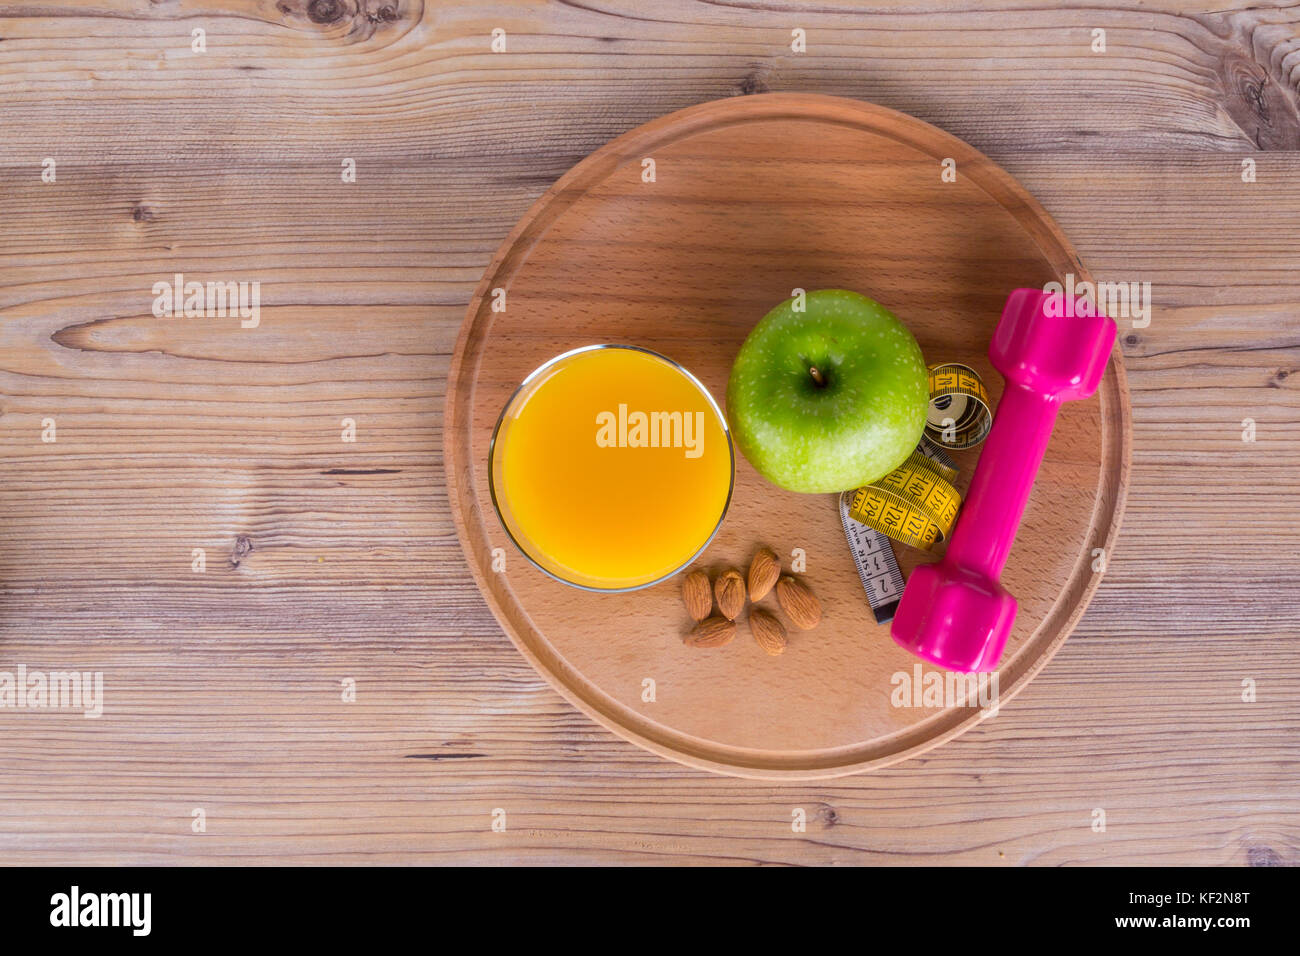 Close up top view of fruits, almond and orange juice, light weight and green apple, measurement tape with healthy fit concept on wooden background. Stock Photo